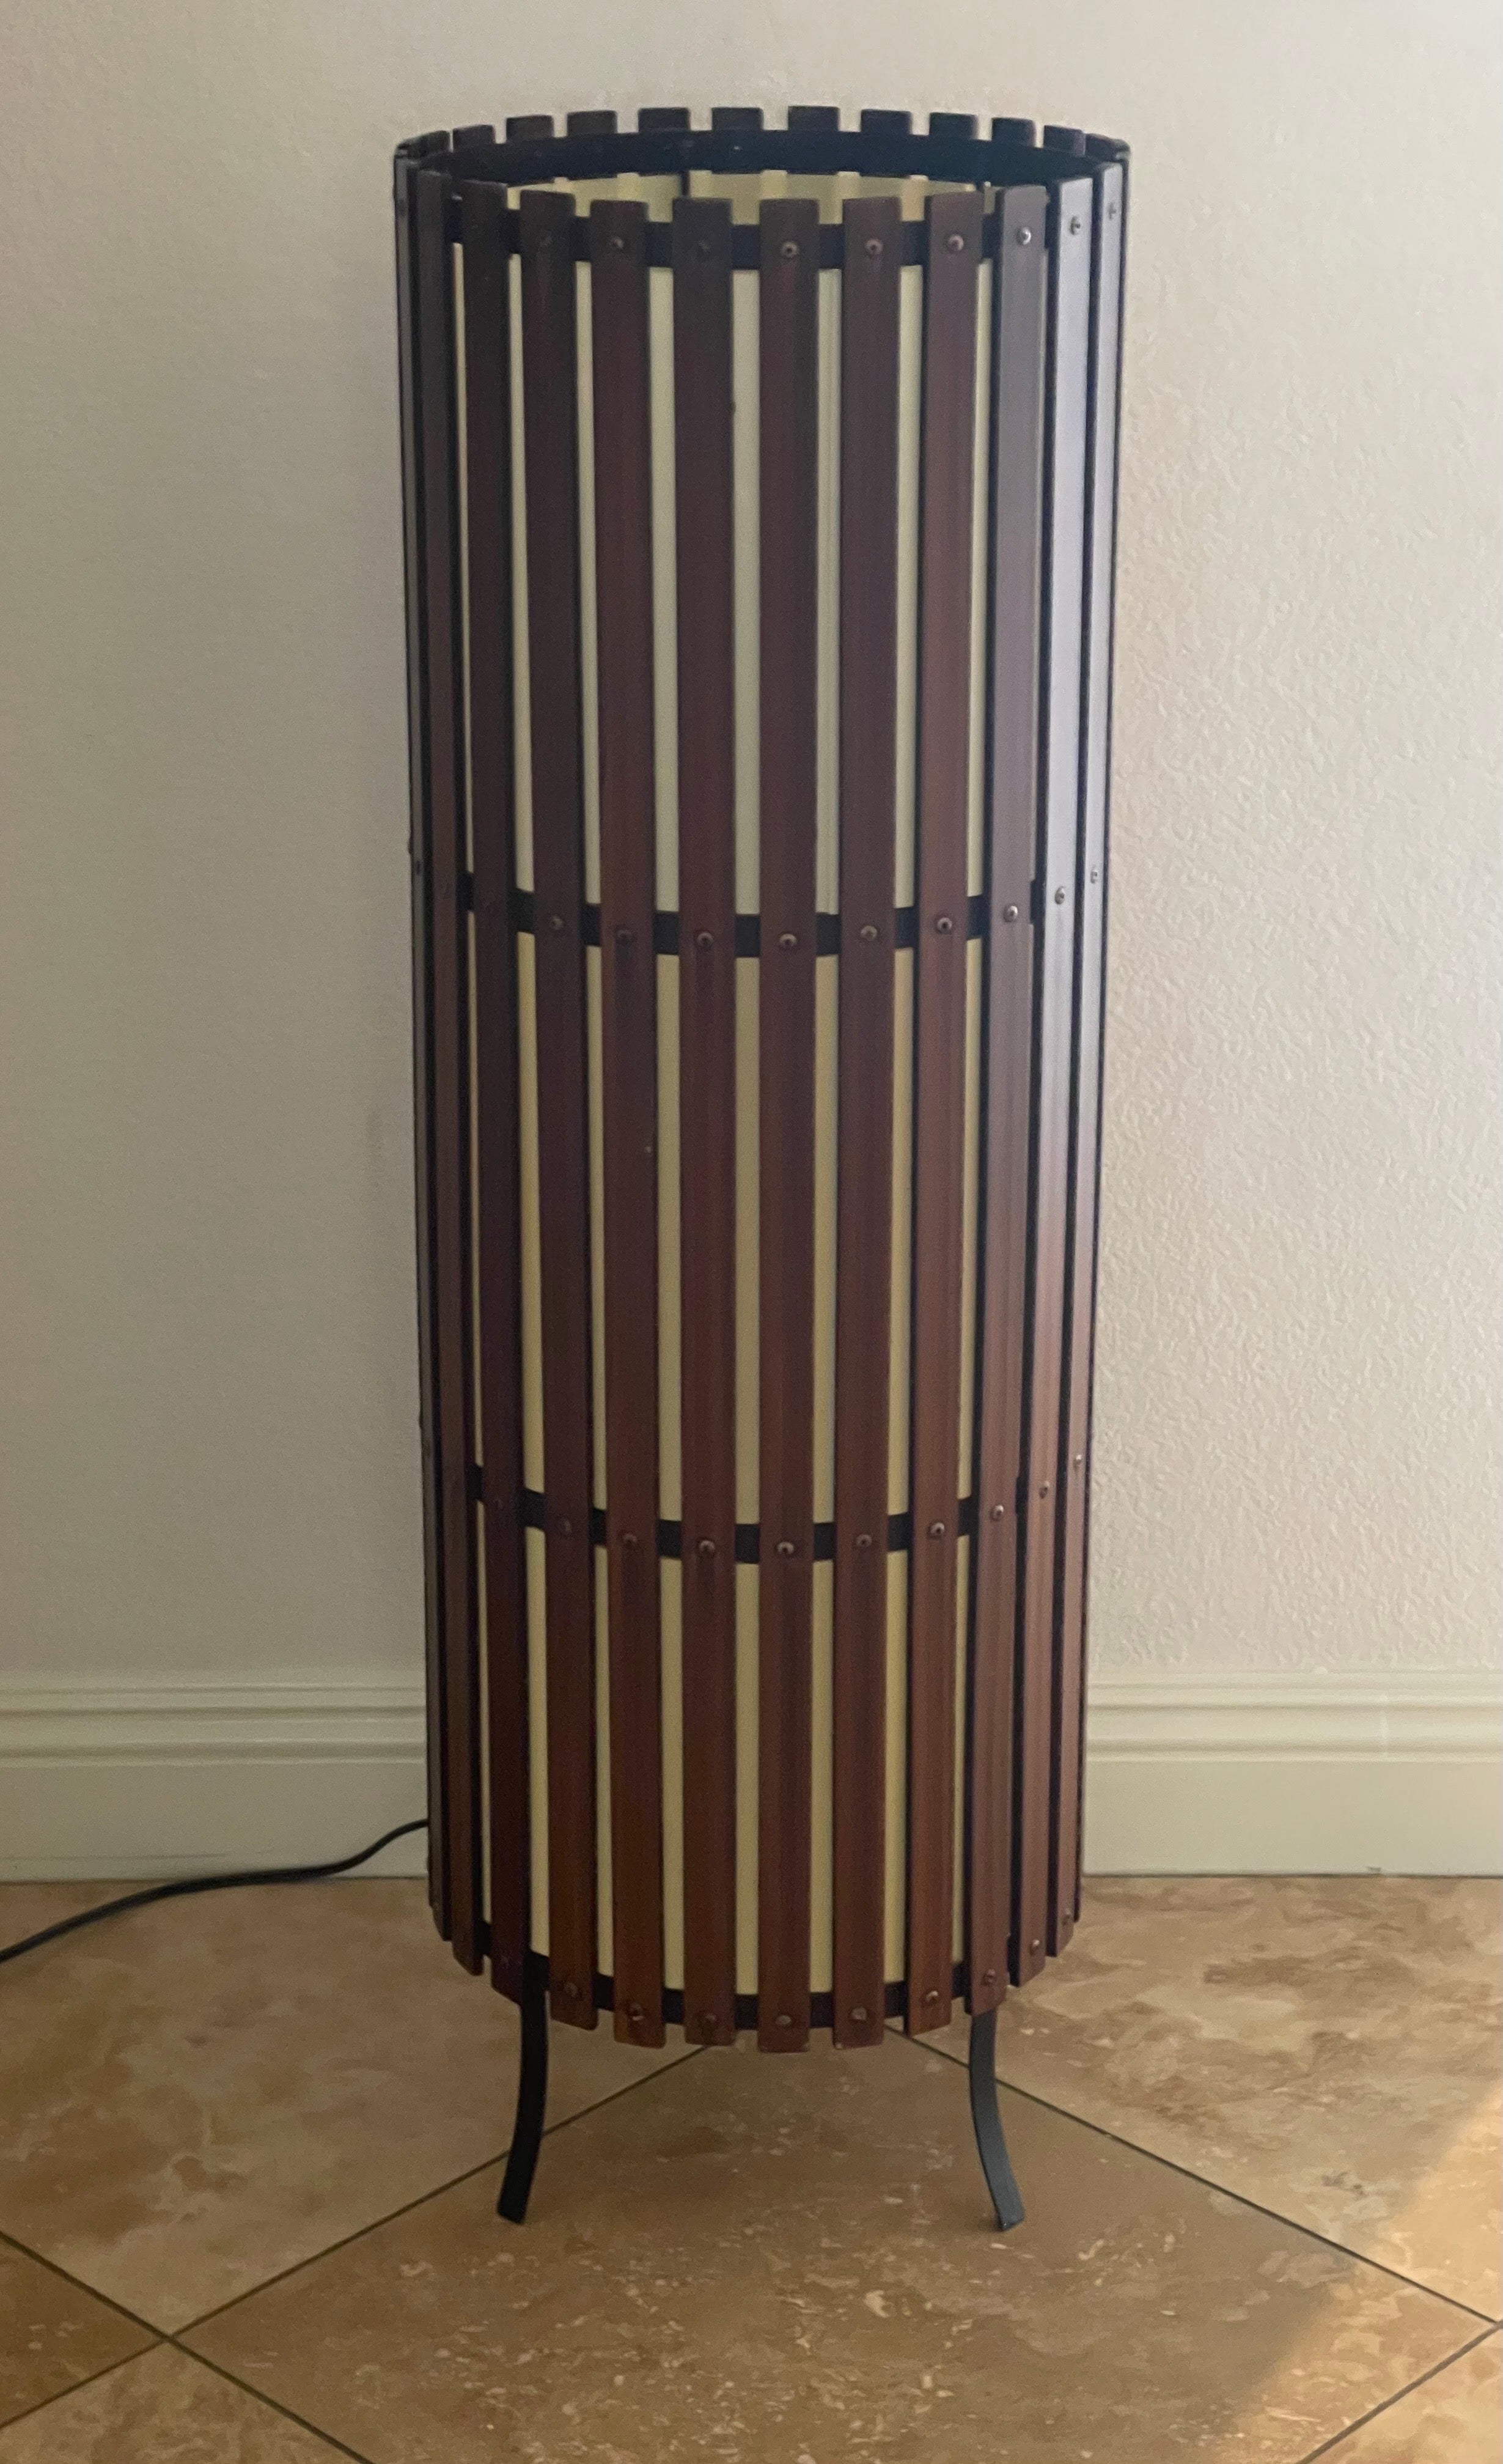 A very hard to find contemporary modernist walnut slat cylindrical floor lamp, circa 1970s. The lamp is made of solid walnut slats surrounding a white acrylic cylinder shaped shade on black metal feet. Wonderful warm glow when illuminated; the piece